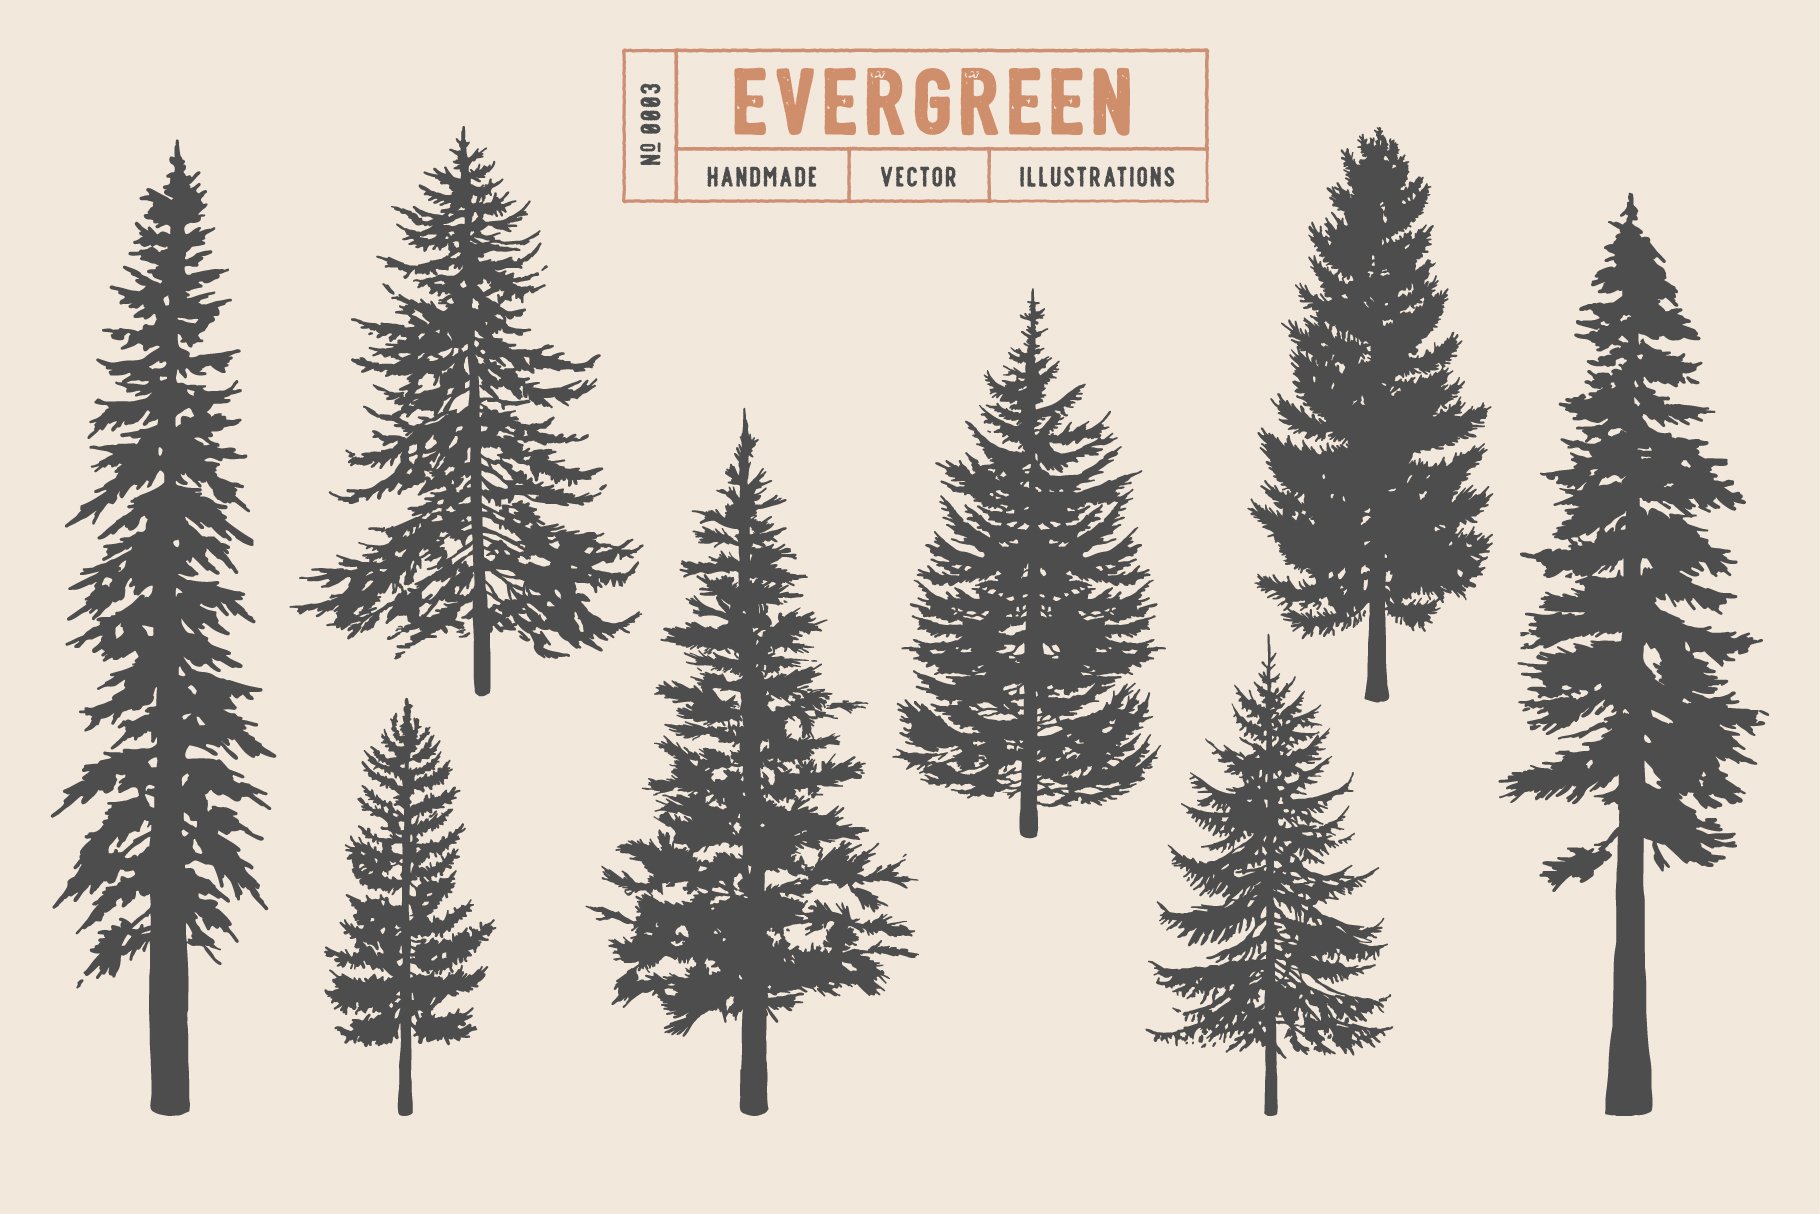 Set of different types of evergreen trees.